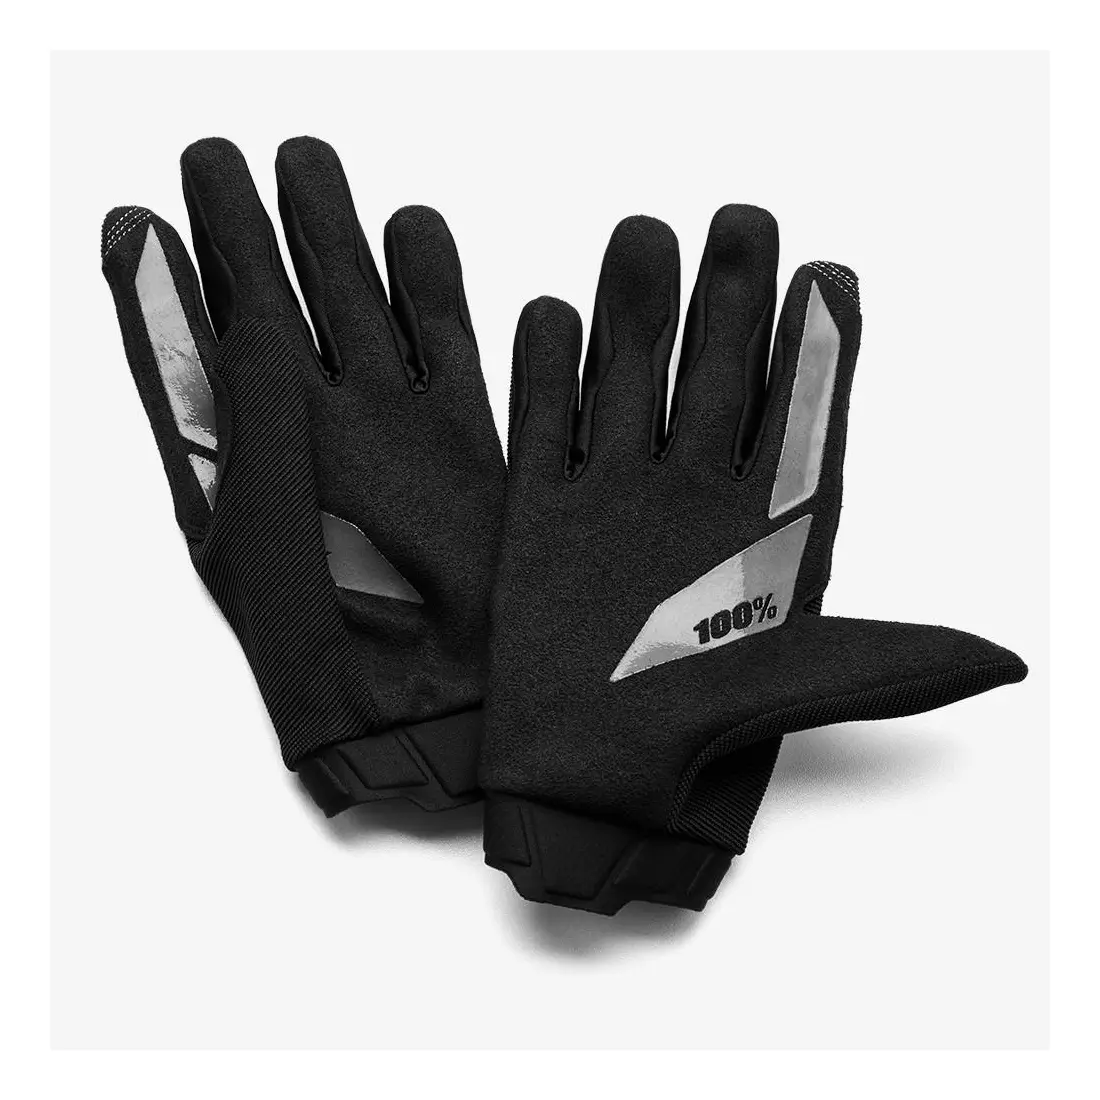 100% women's cycling gloves ridecamp blue STO-11018-002-10